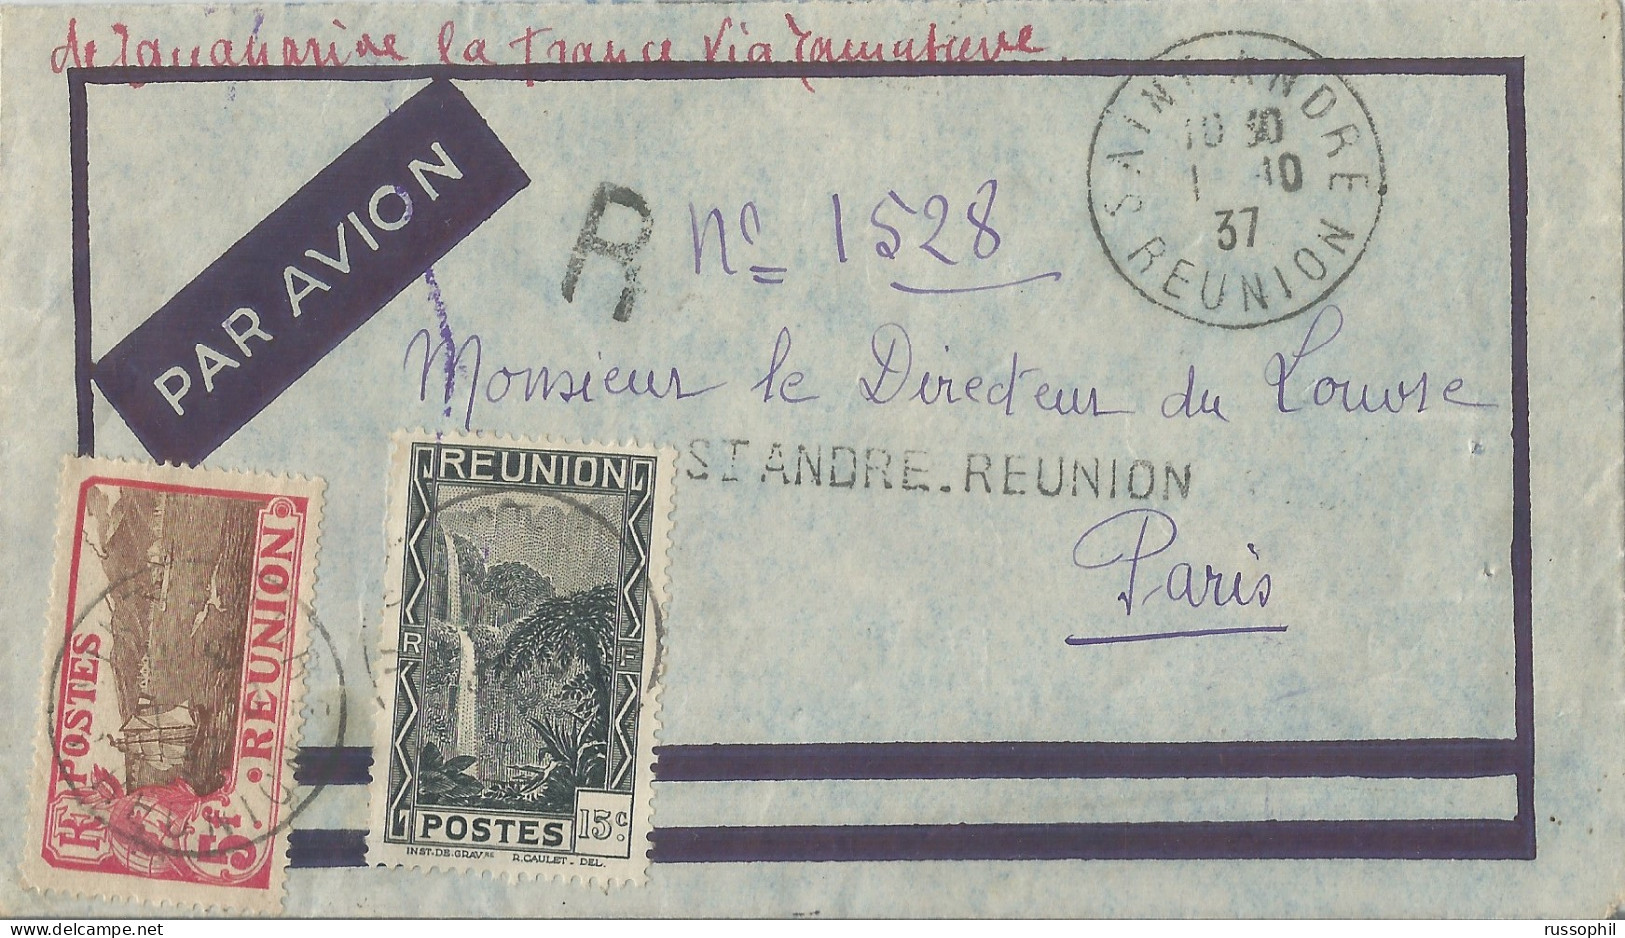 REUNION - 5 FR 15 CENT.  2 STAMP FRANKING ON REGISTERED AIR COVER FROM SAINT ANDRE TO MAINLAND FRANCE - 1937 - Lettres & Documents